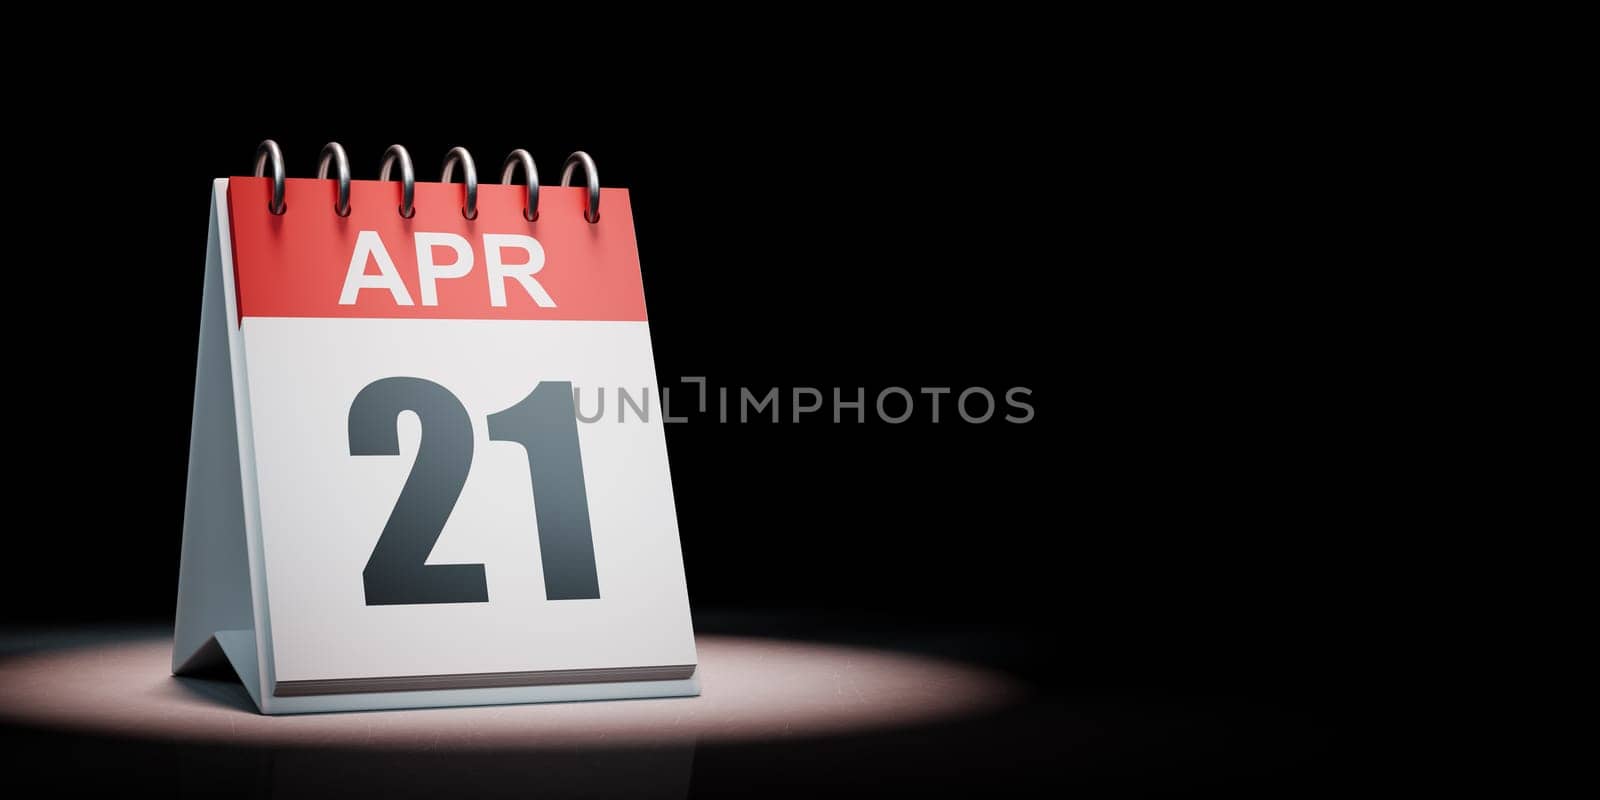 Red and White April 21 Desk Calendar Spotlighted on Black Background with Copy Space 3D Illustration